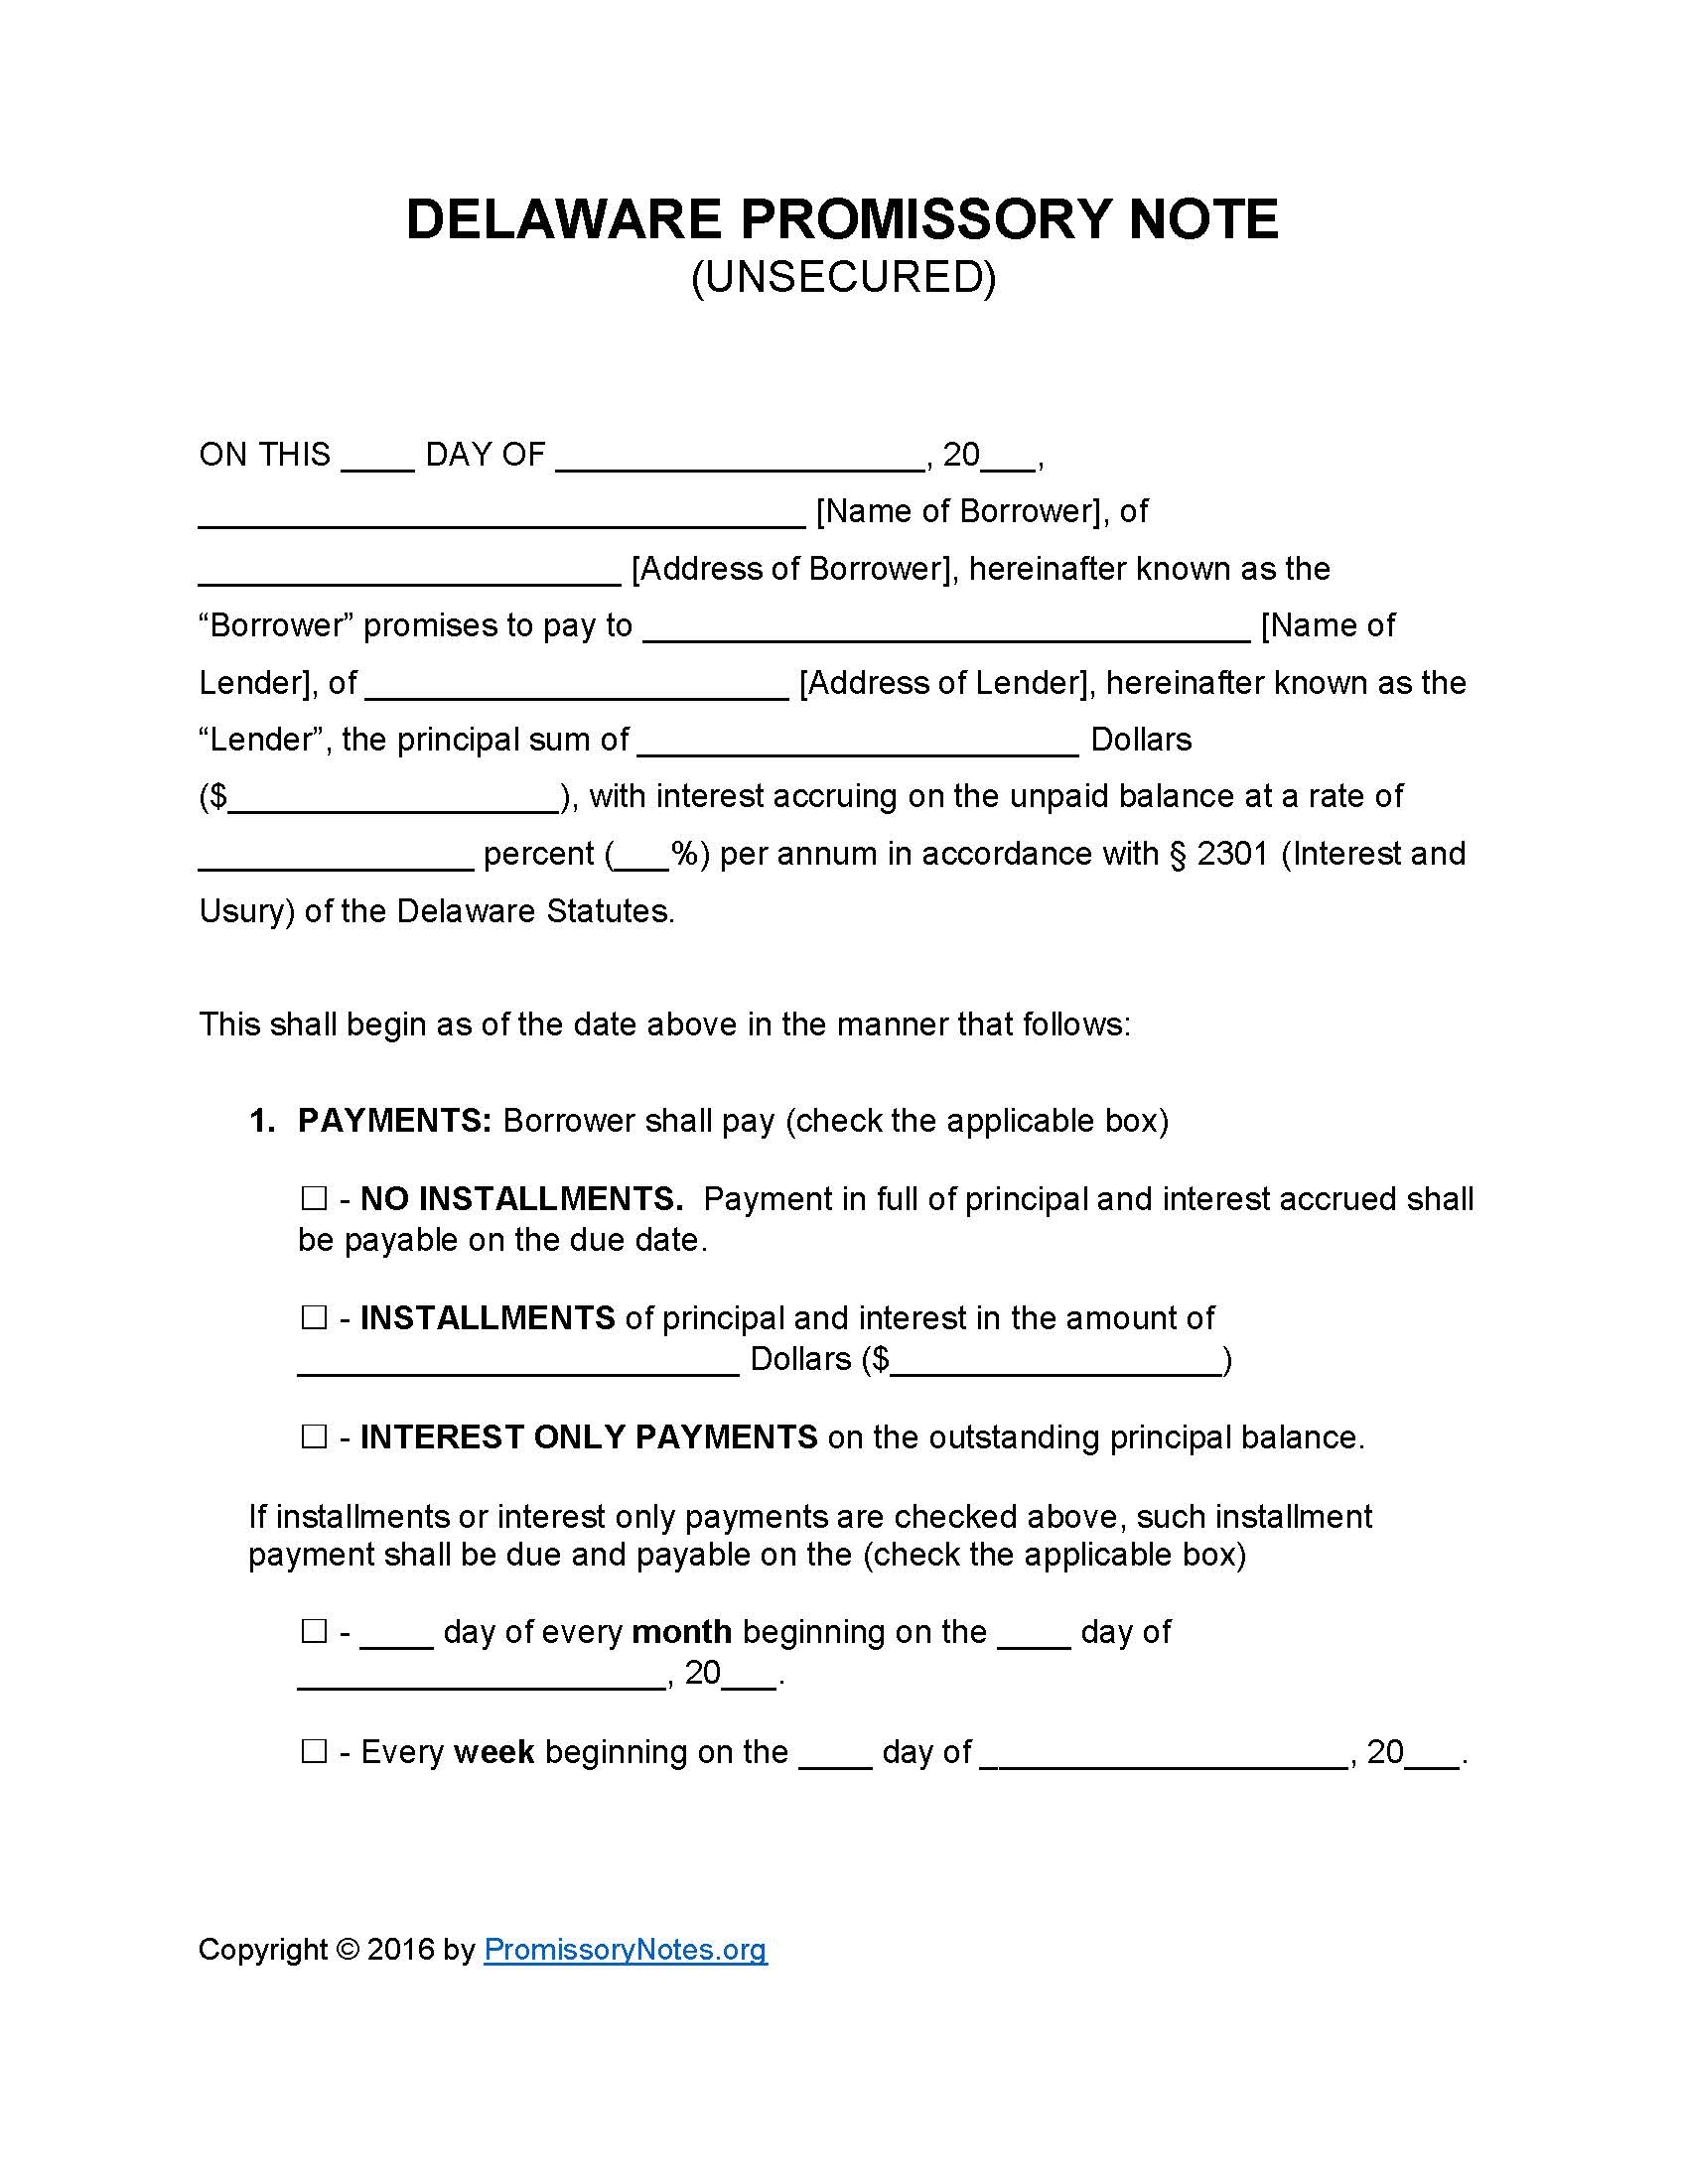 delaware-unsecured-promissory-note-form